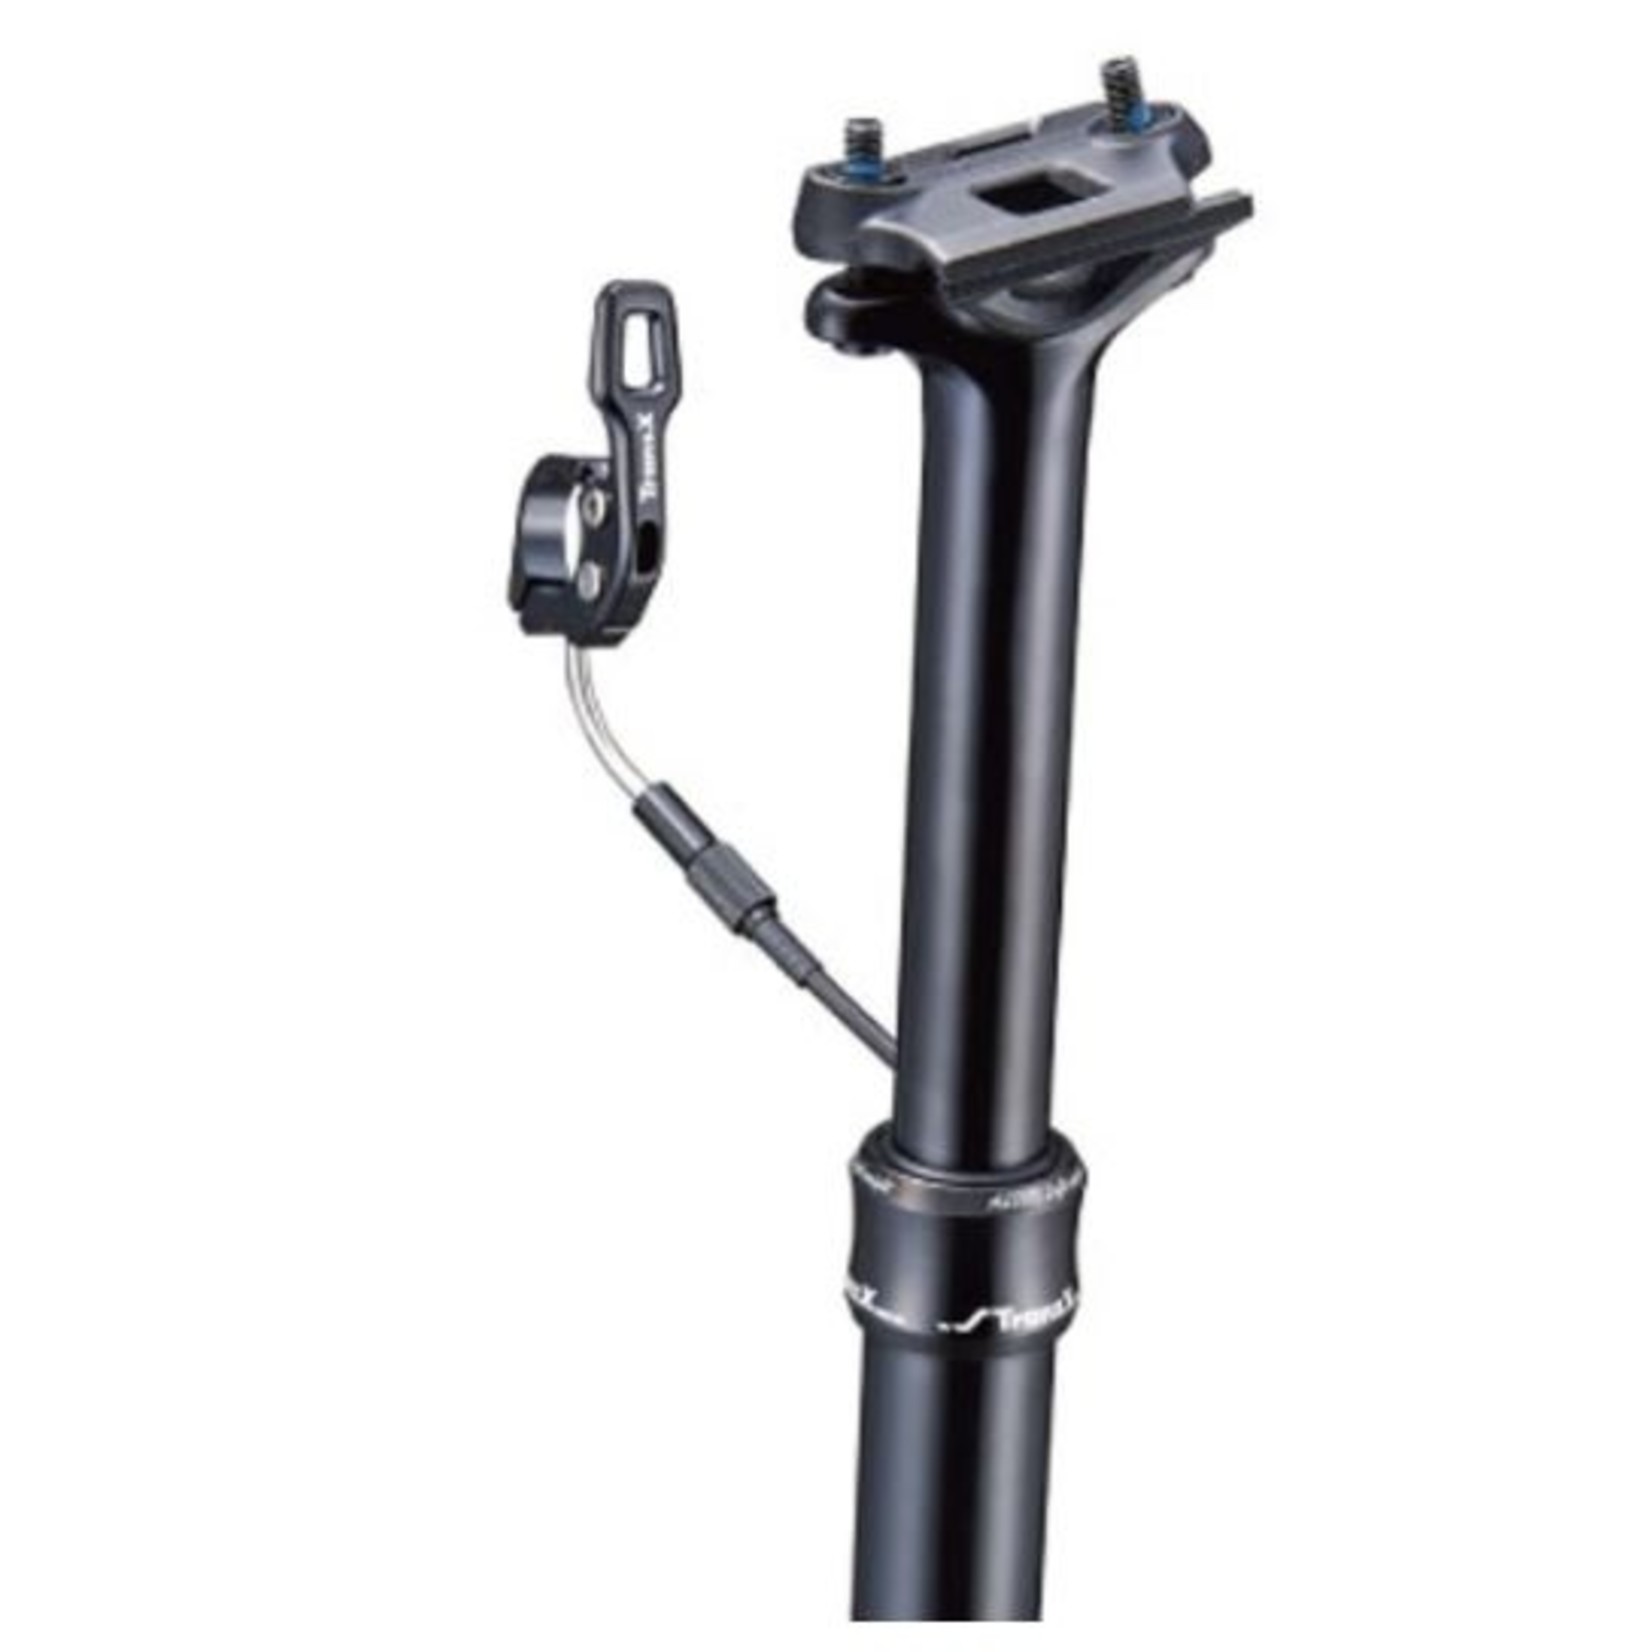 Tranzx Tranzx Bicycle Dropper Seatpost - Internal Routed Cable - 30.9mm - 170mm Travel